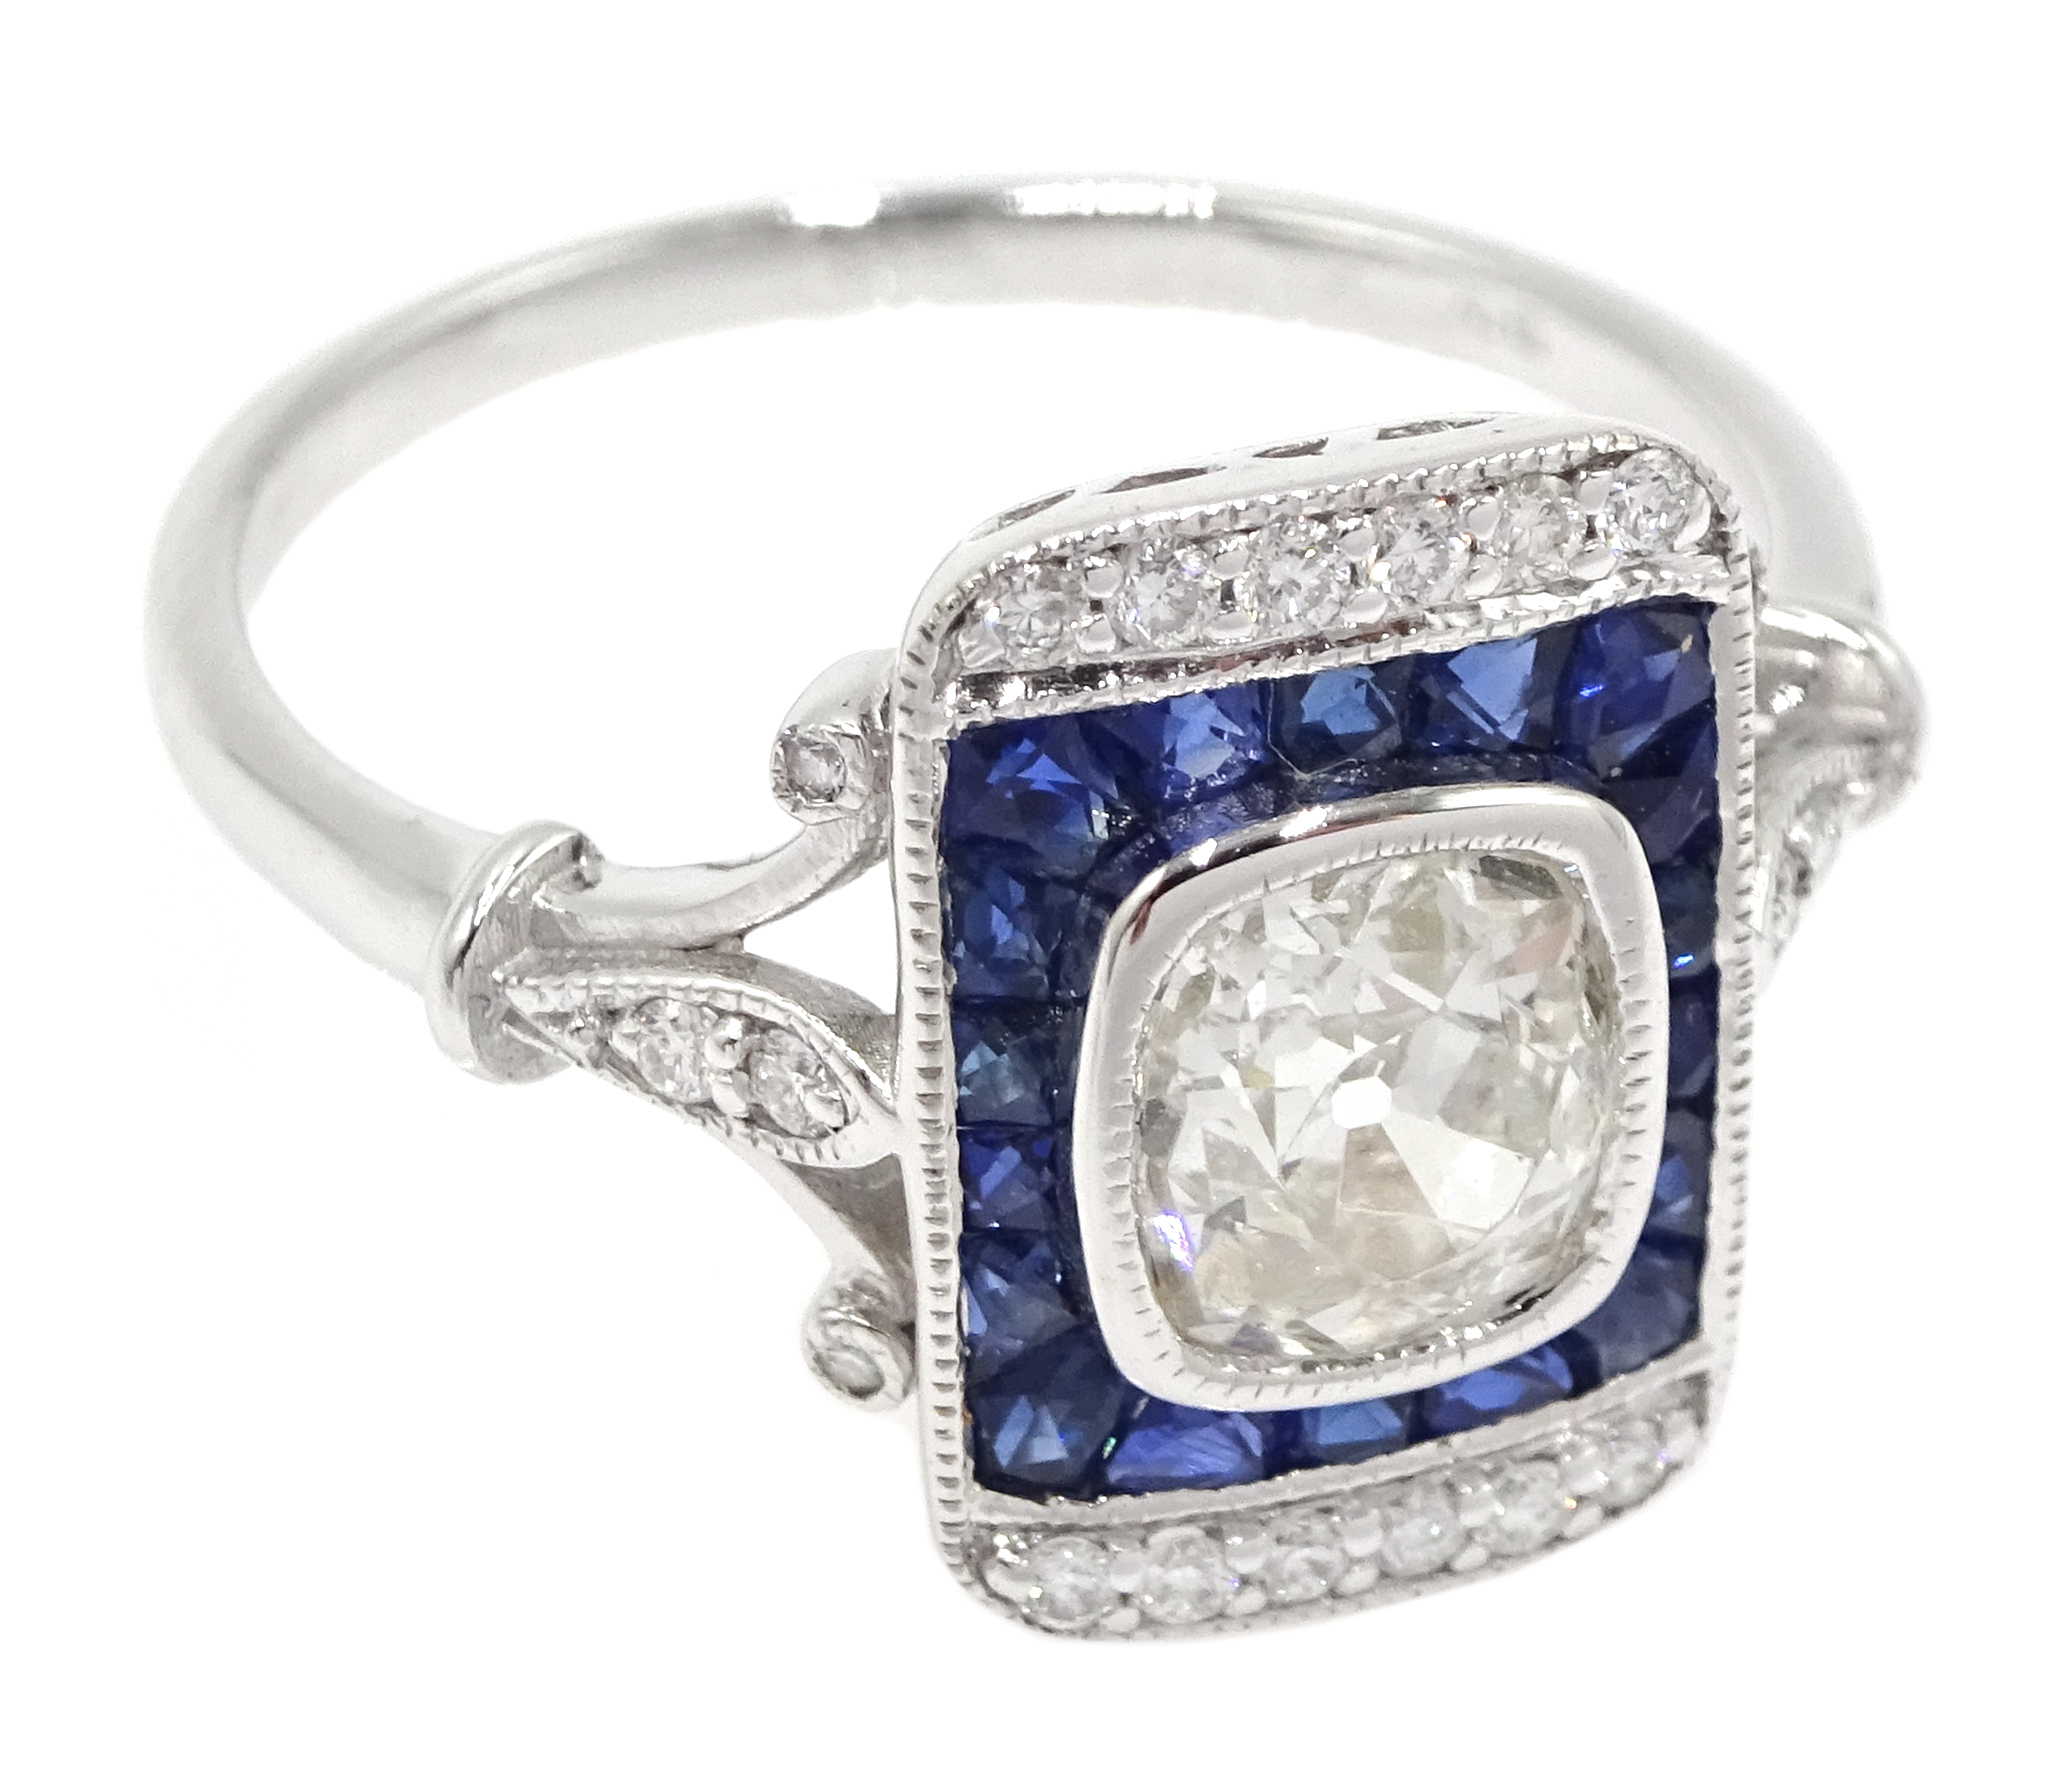 Art Deco style 18ct white gold, sapphire and diamond ring - Image 3 of 6